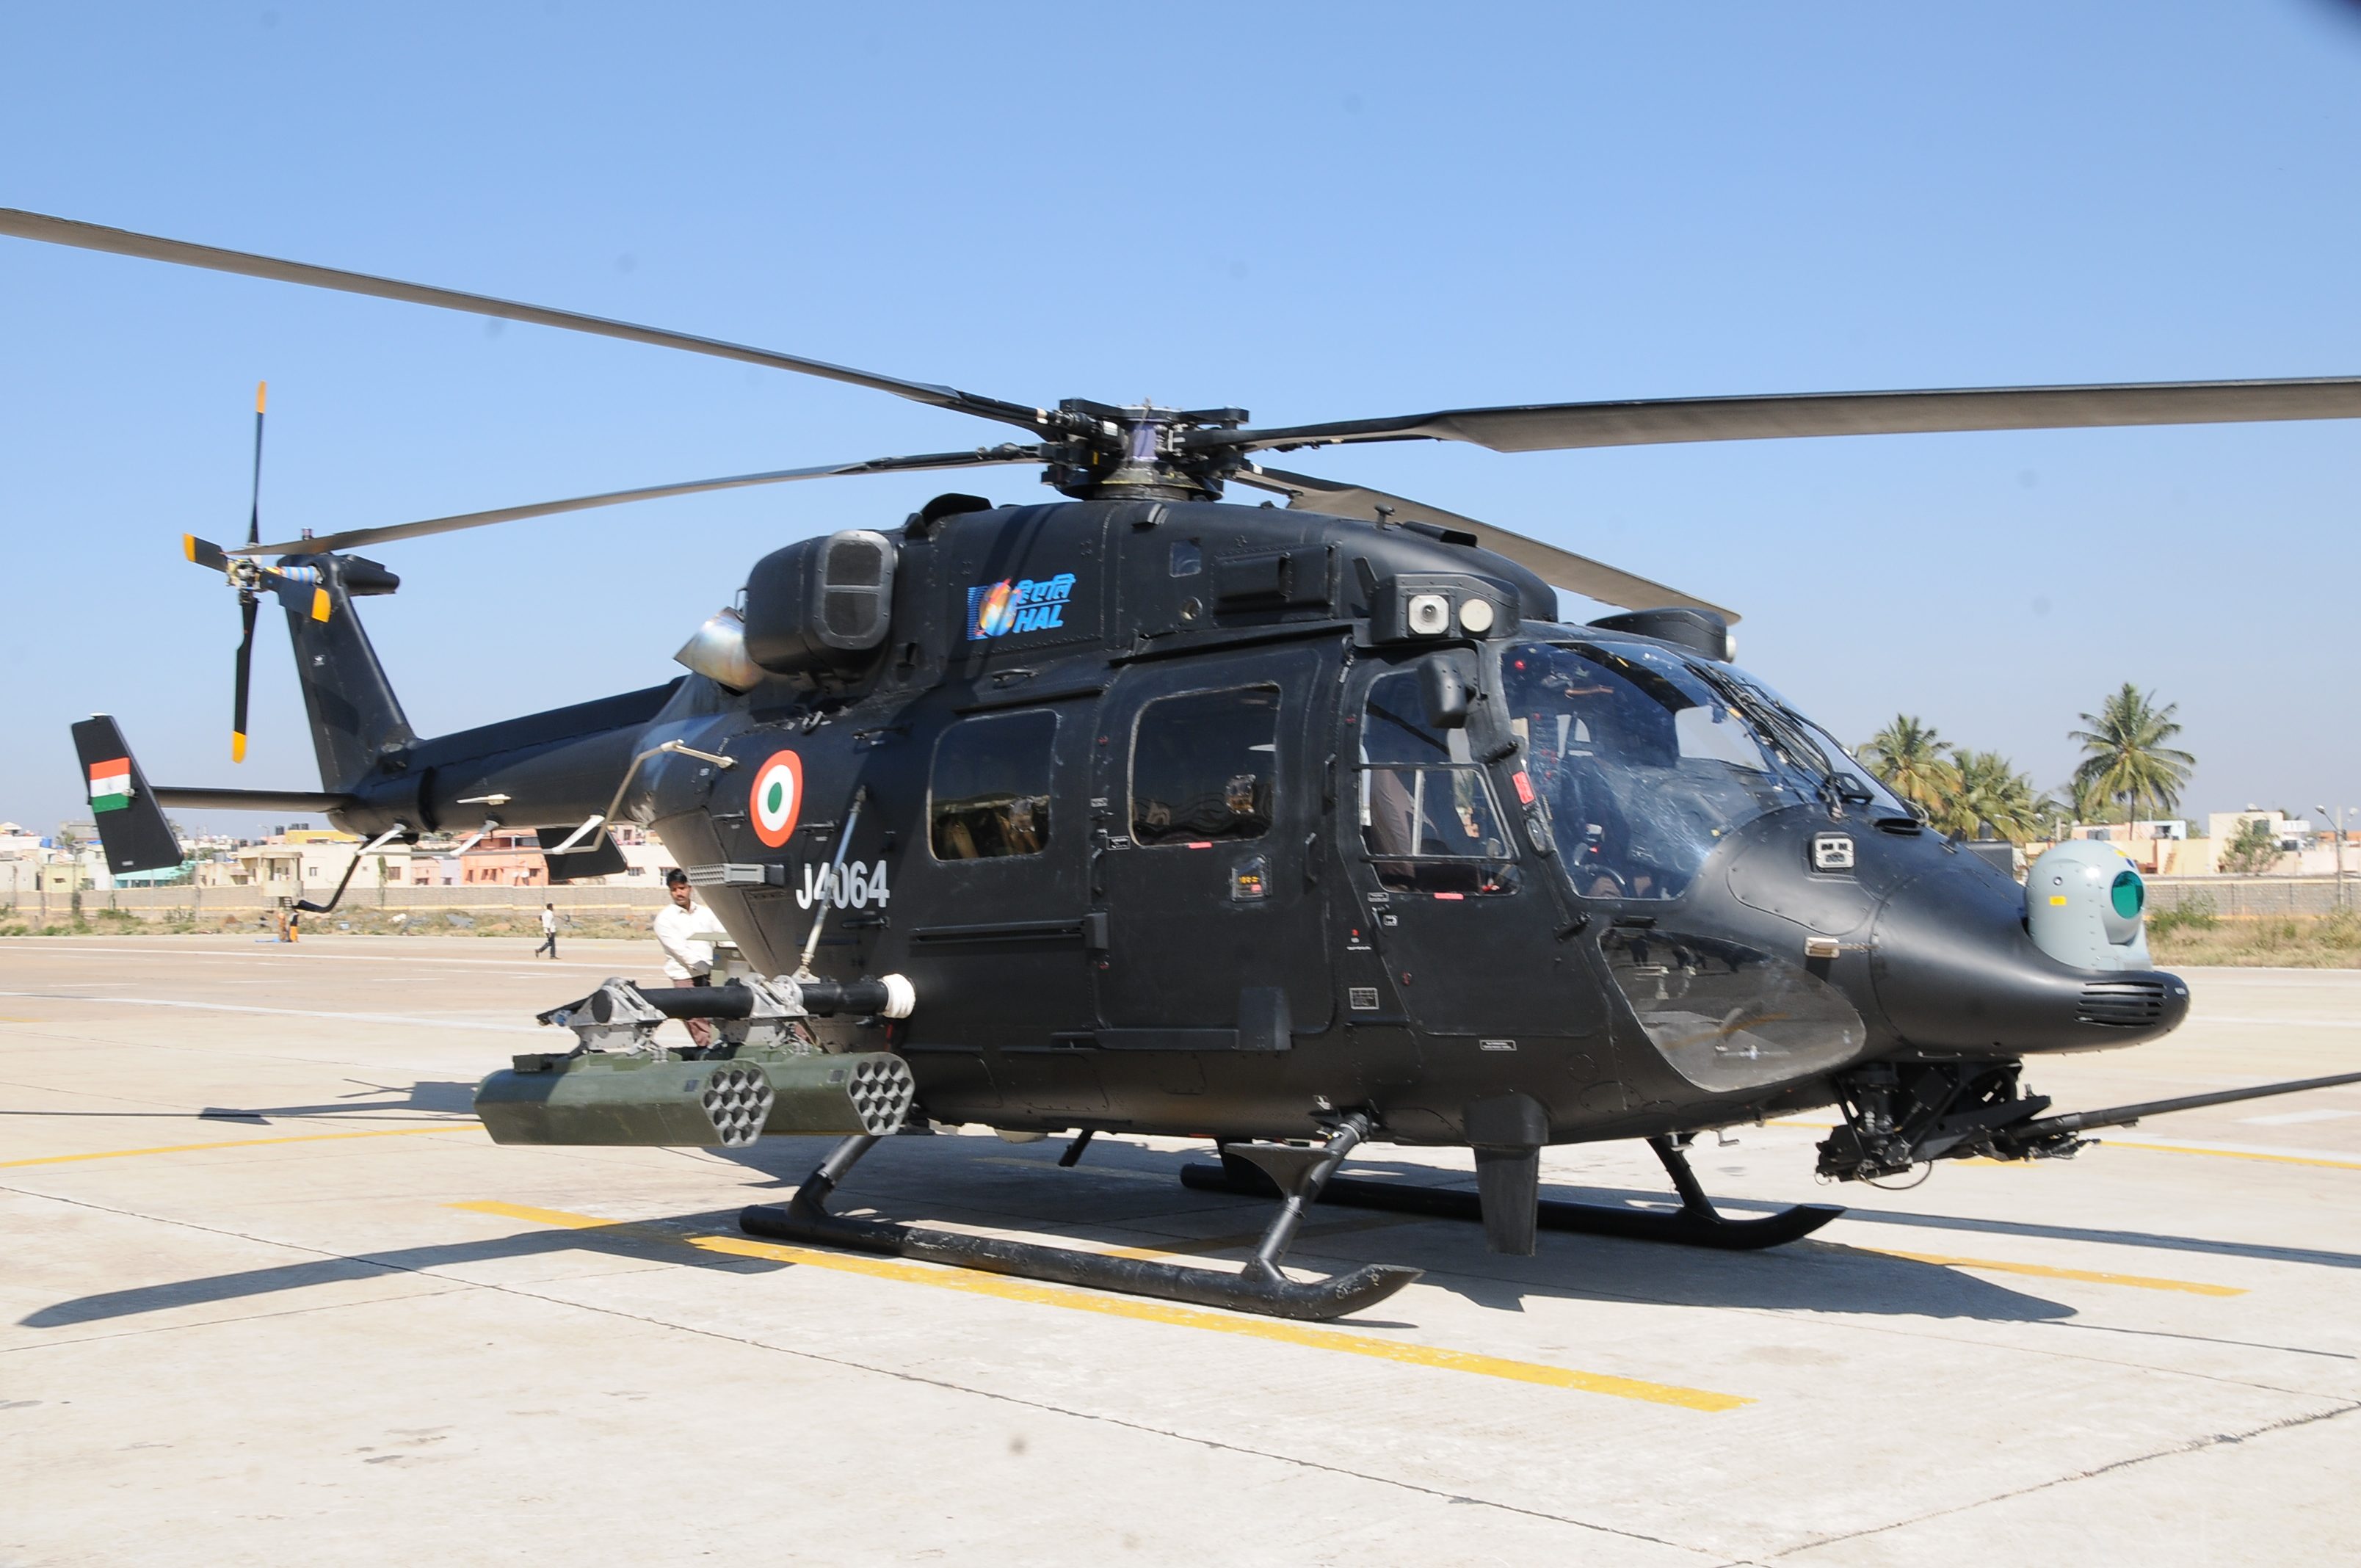 Hindustan Advanced Light Helicopter #7